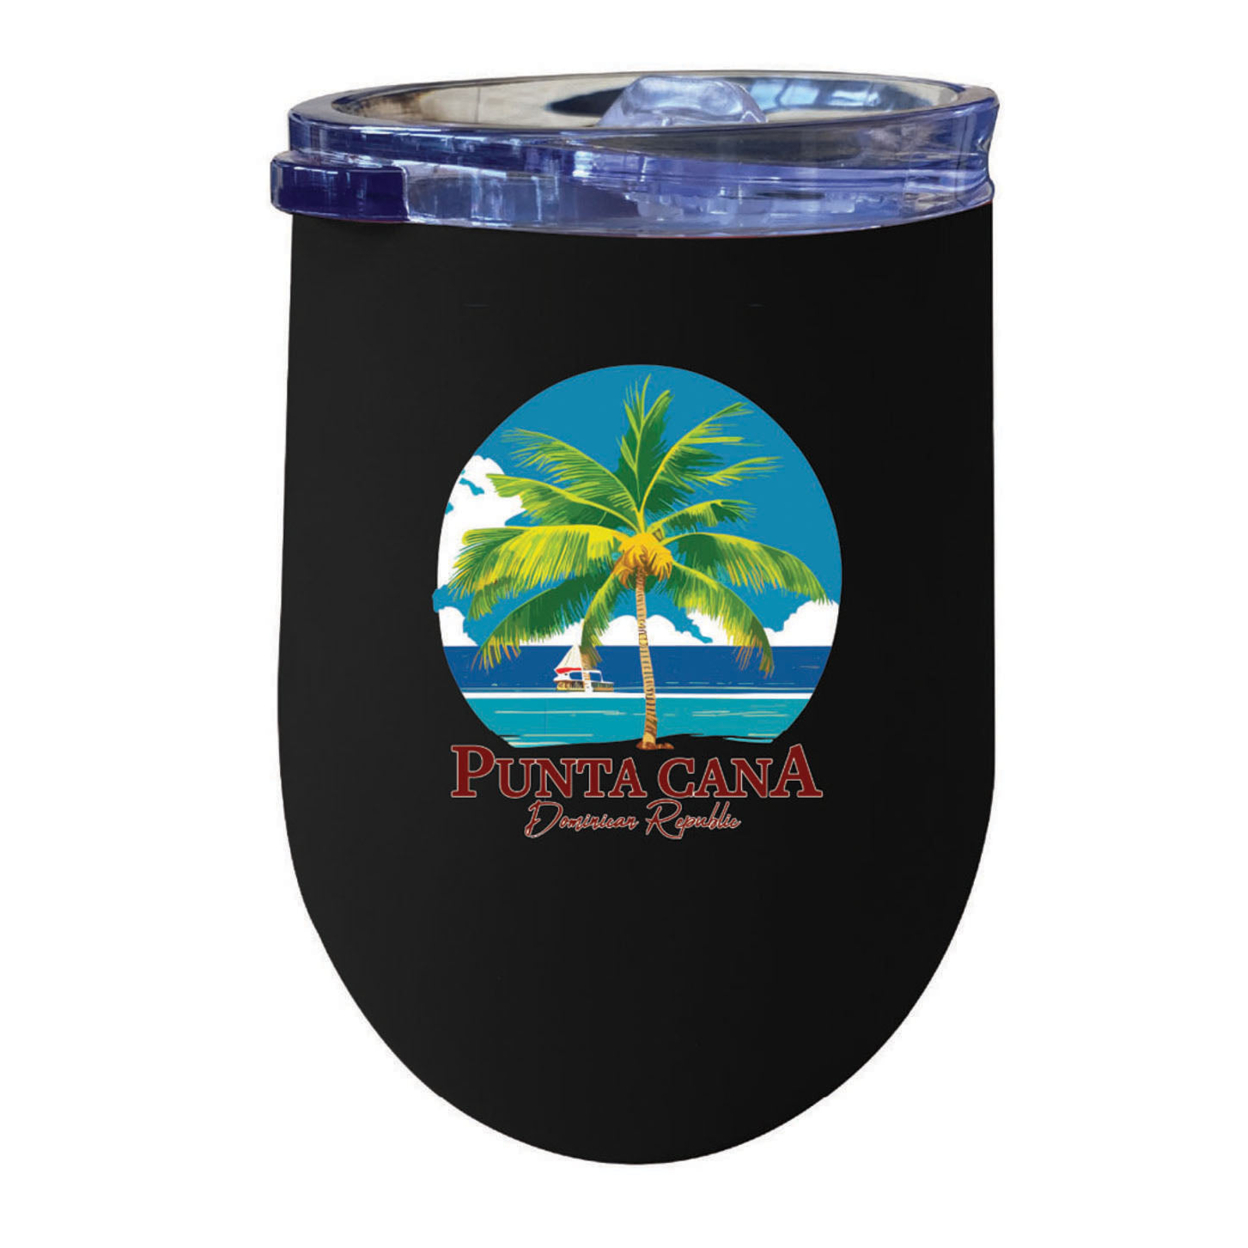 Punta Cana Dominican Republic Souvenir 12 Oz Insulated Wine Stainless Steel Tumbler - Purple, PARROT B